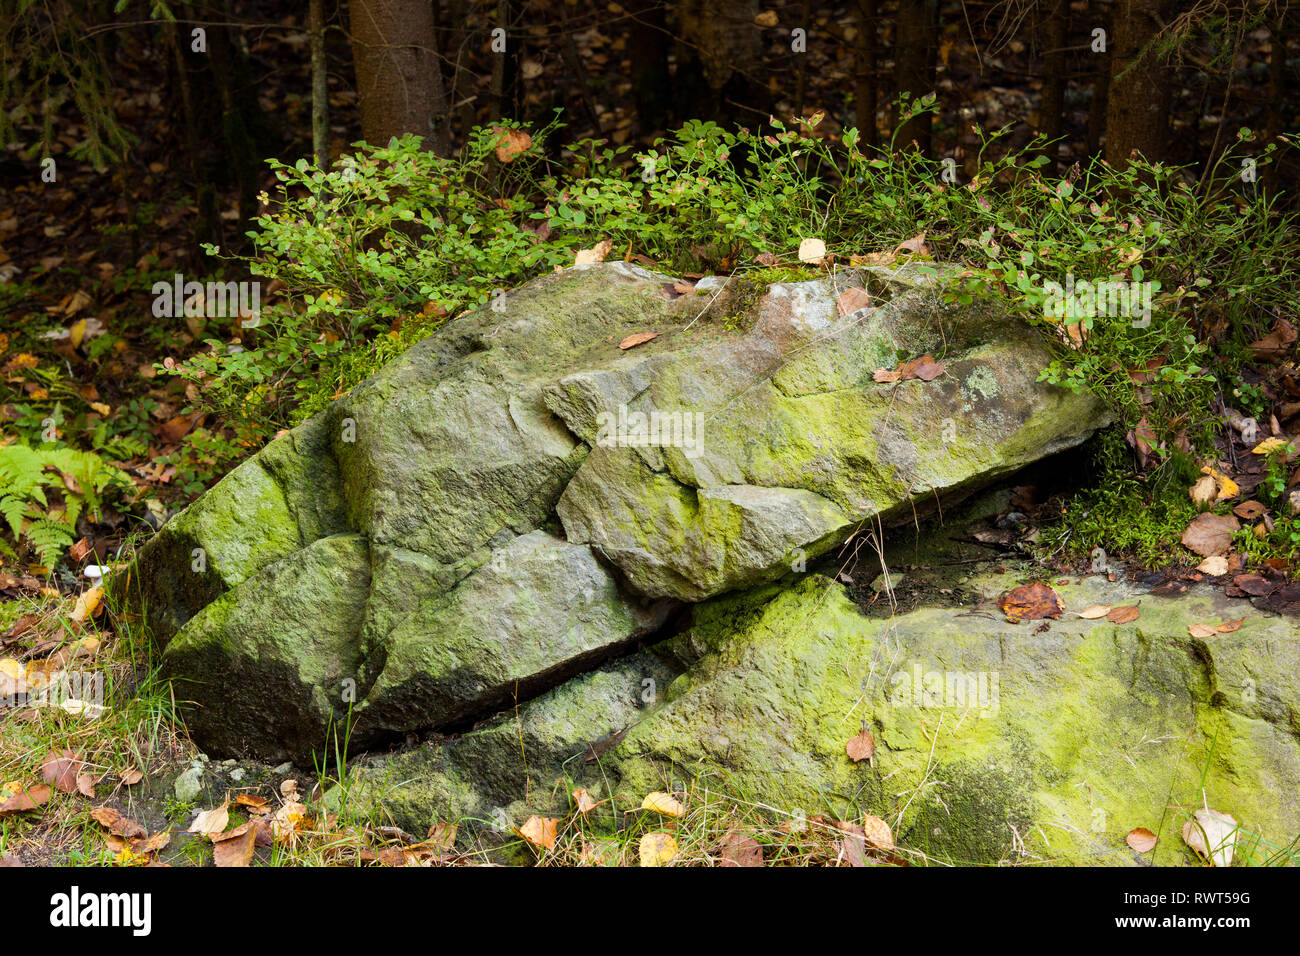 Big rock in forest Stock Photo